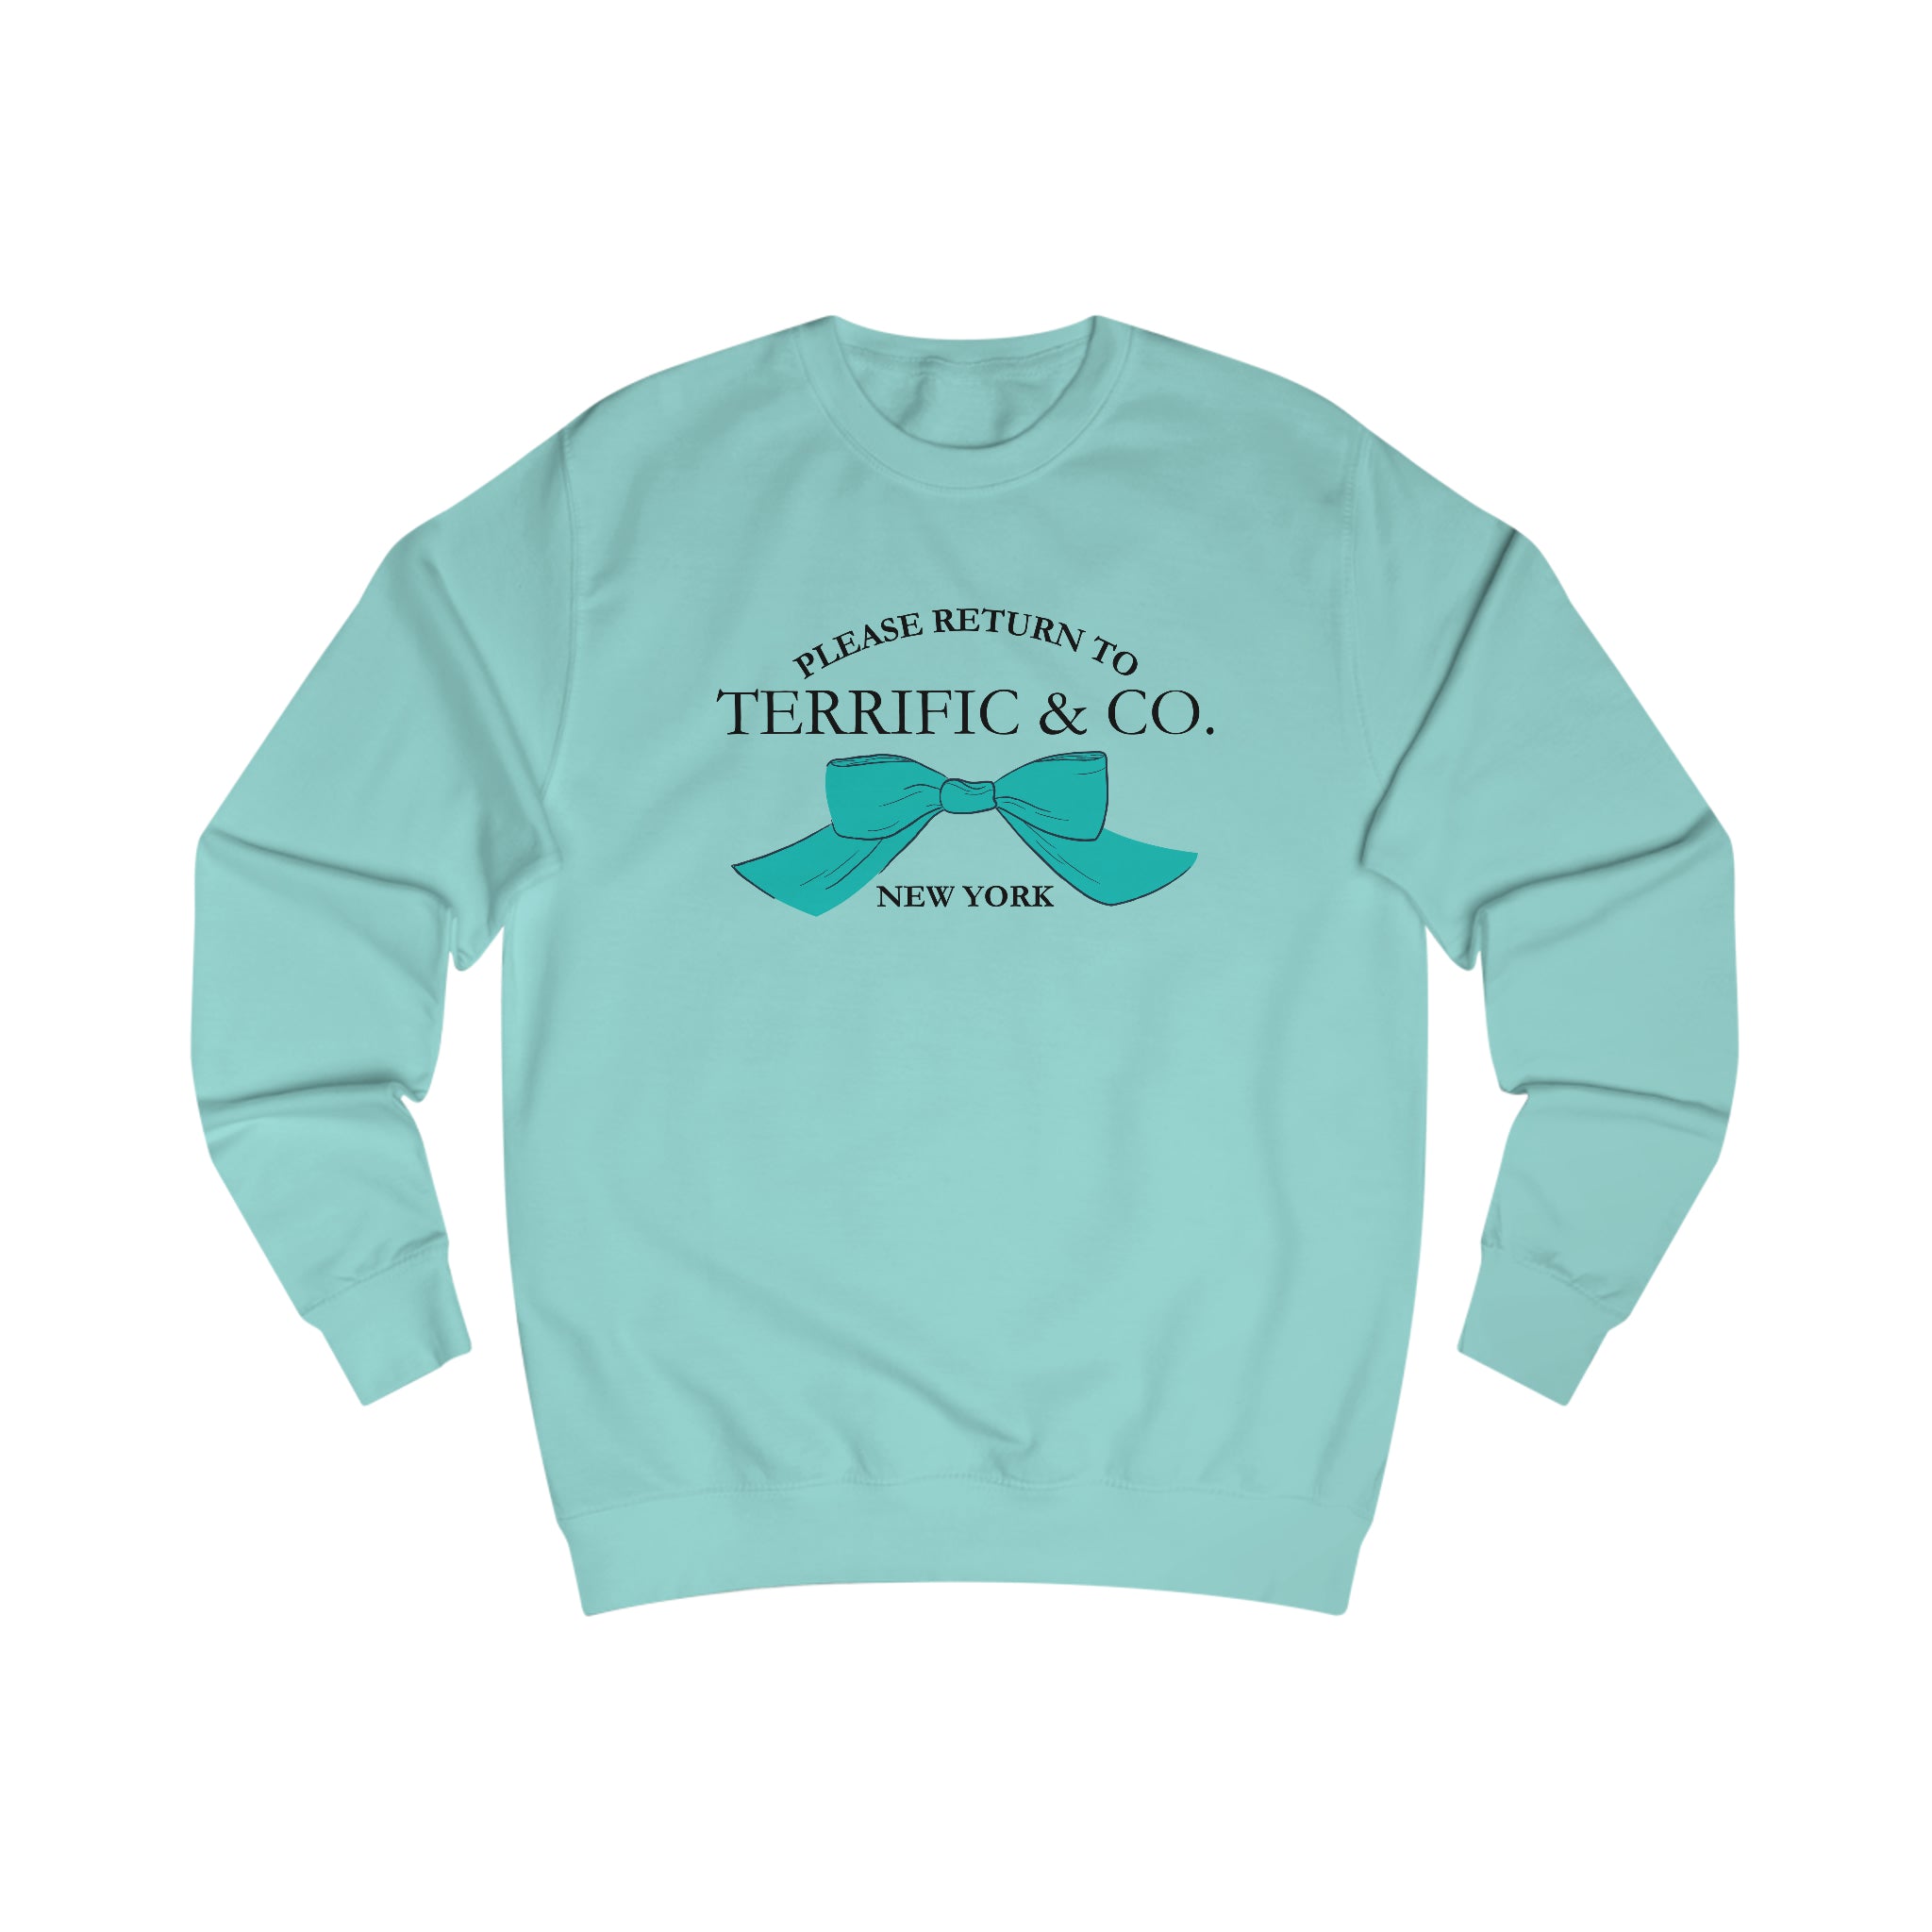 Please Return To Terrific and Co. (Bow) Designer inspired Relaxed Fit Unisex Sweatshirt Sweatshirt Peppermint-2XL The Middle Aged Groove